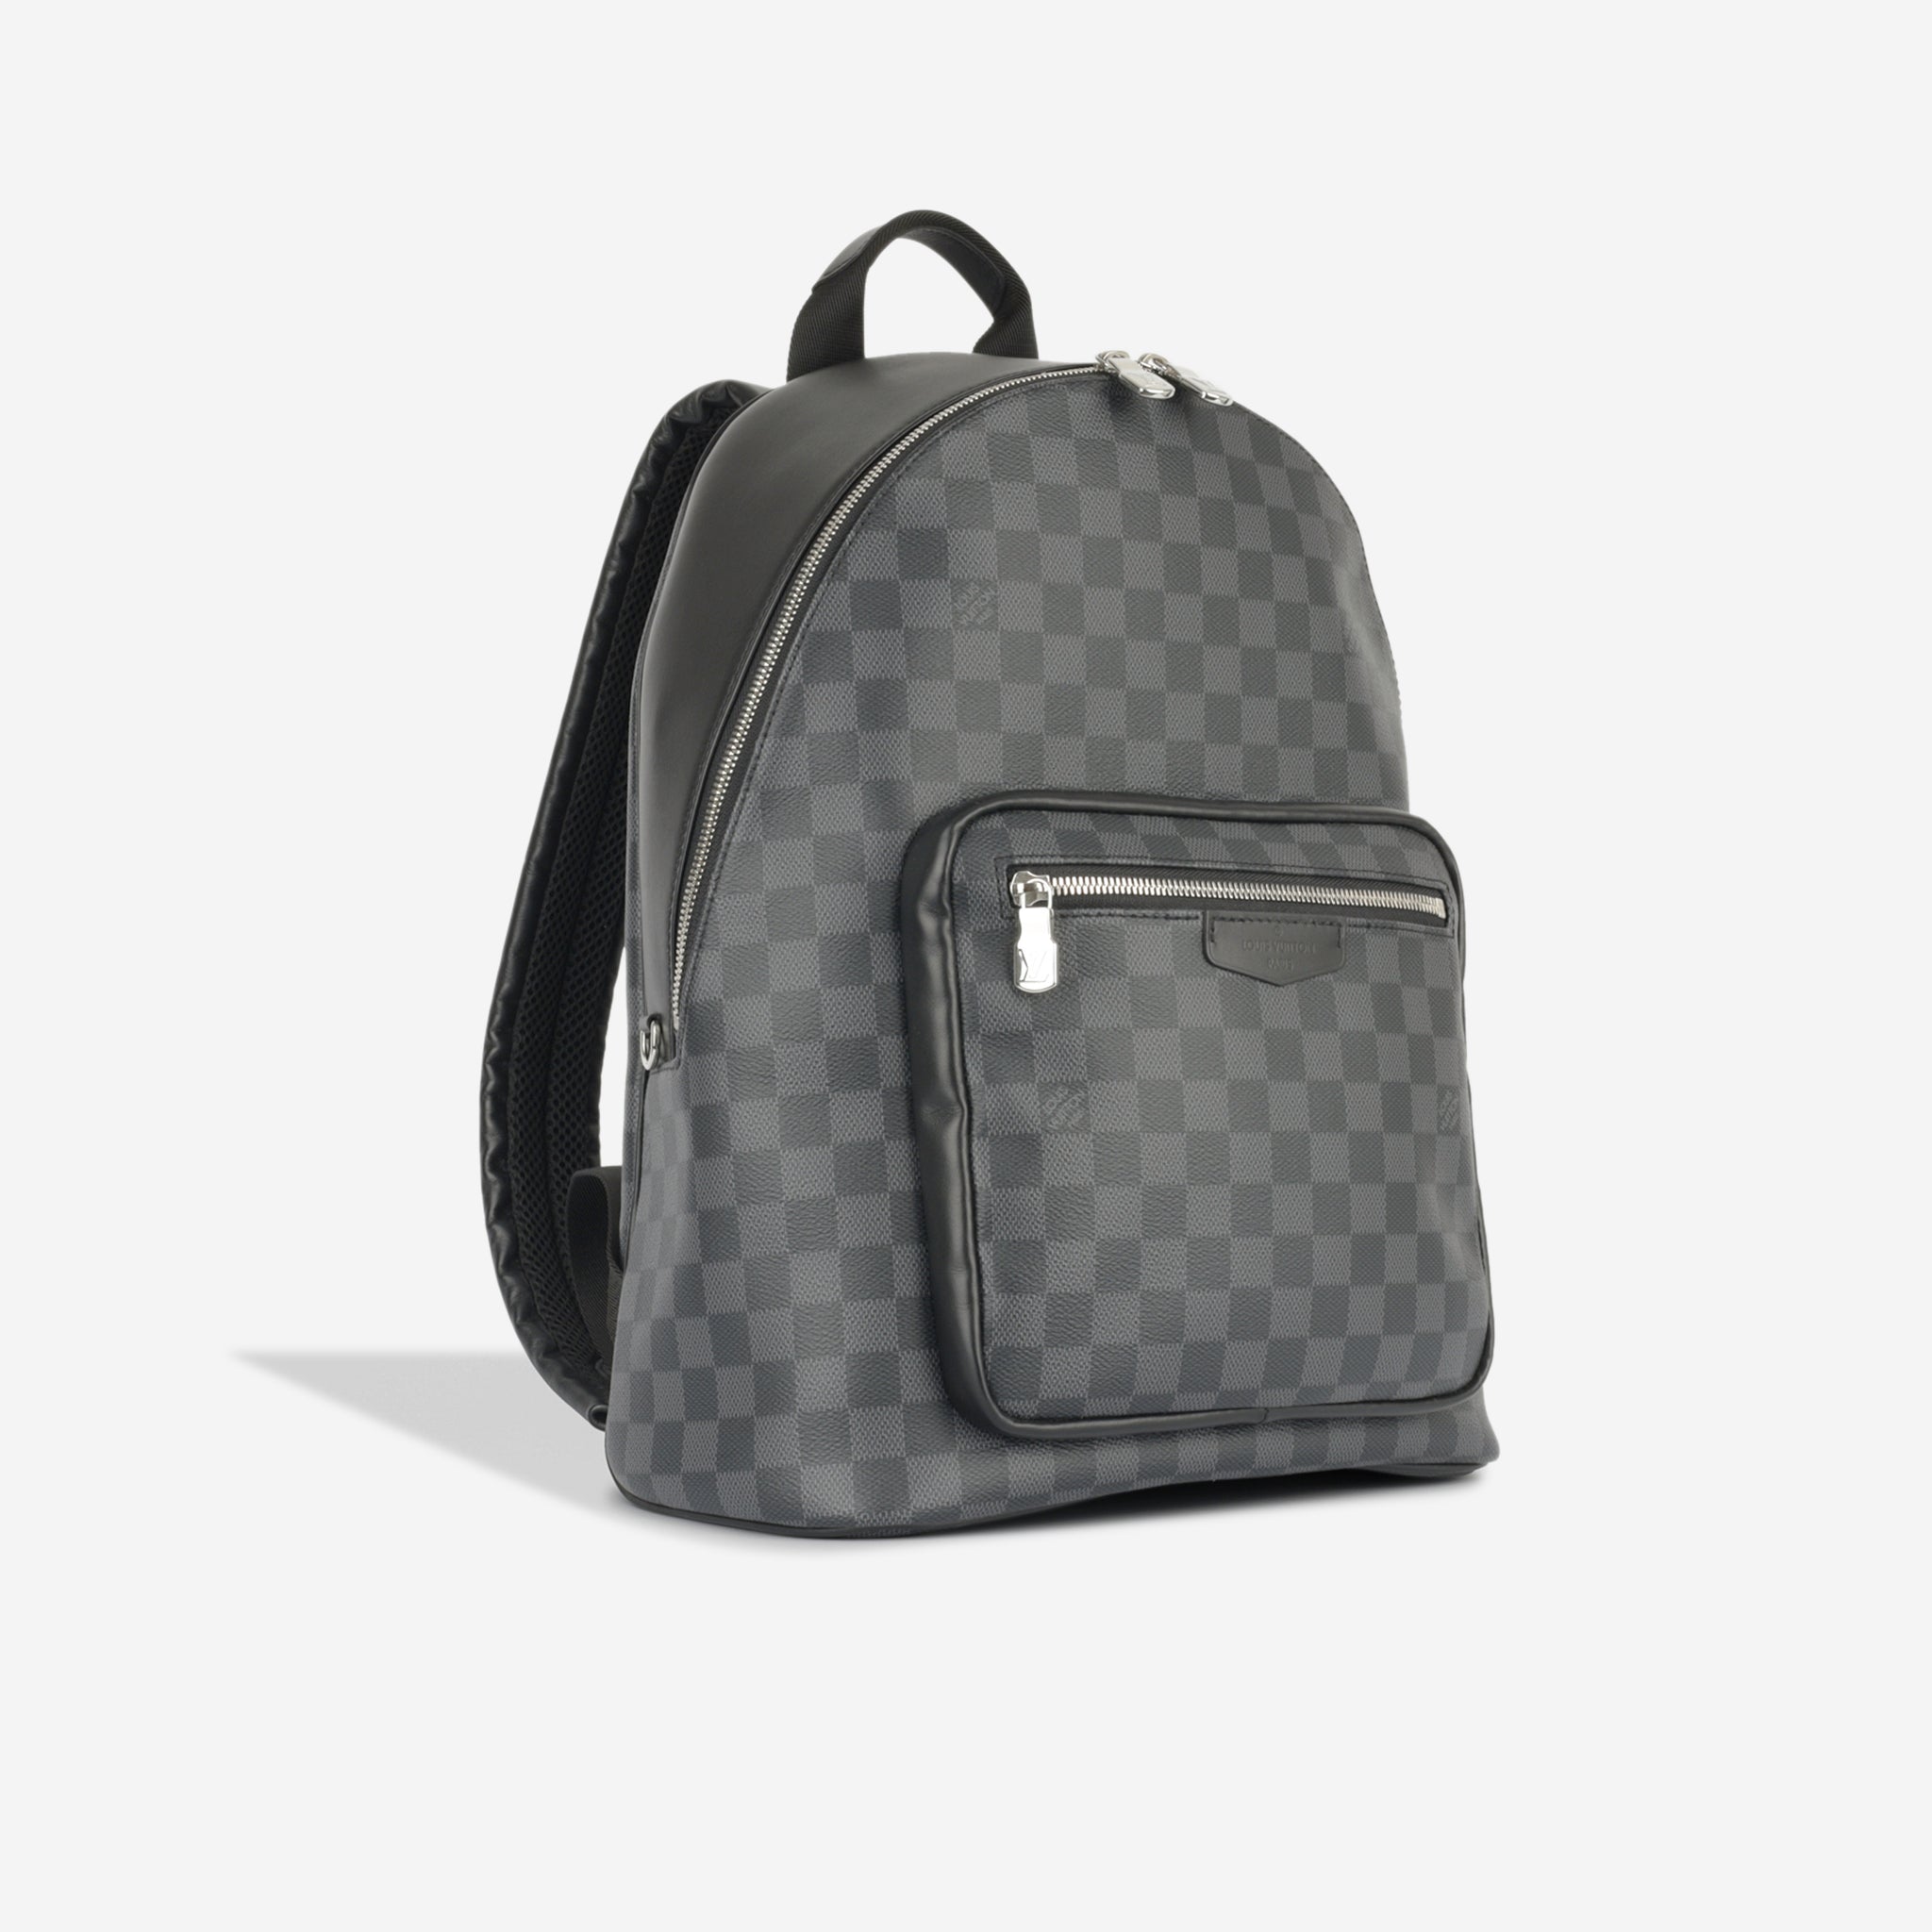 Josh backpack leather bag Louis Vuitton Black in Leather - 29426903